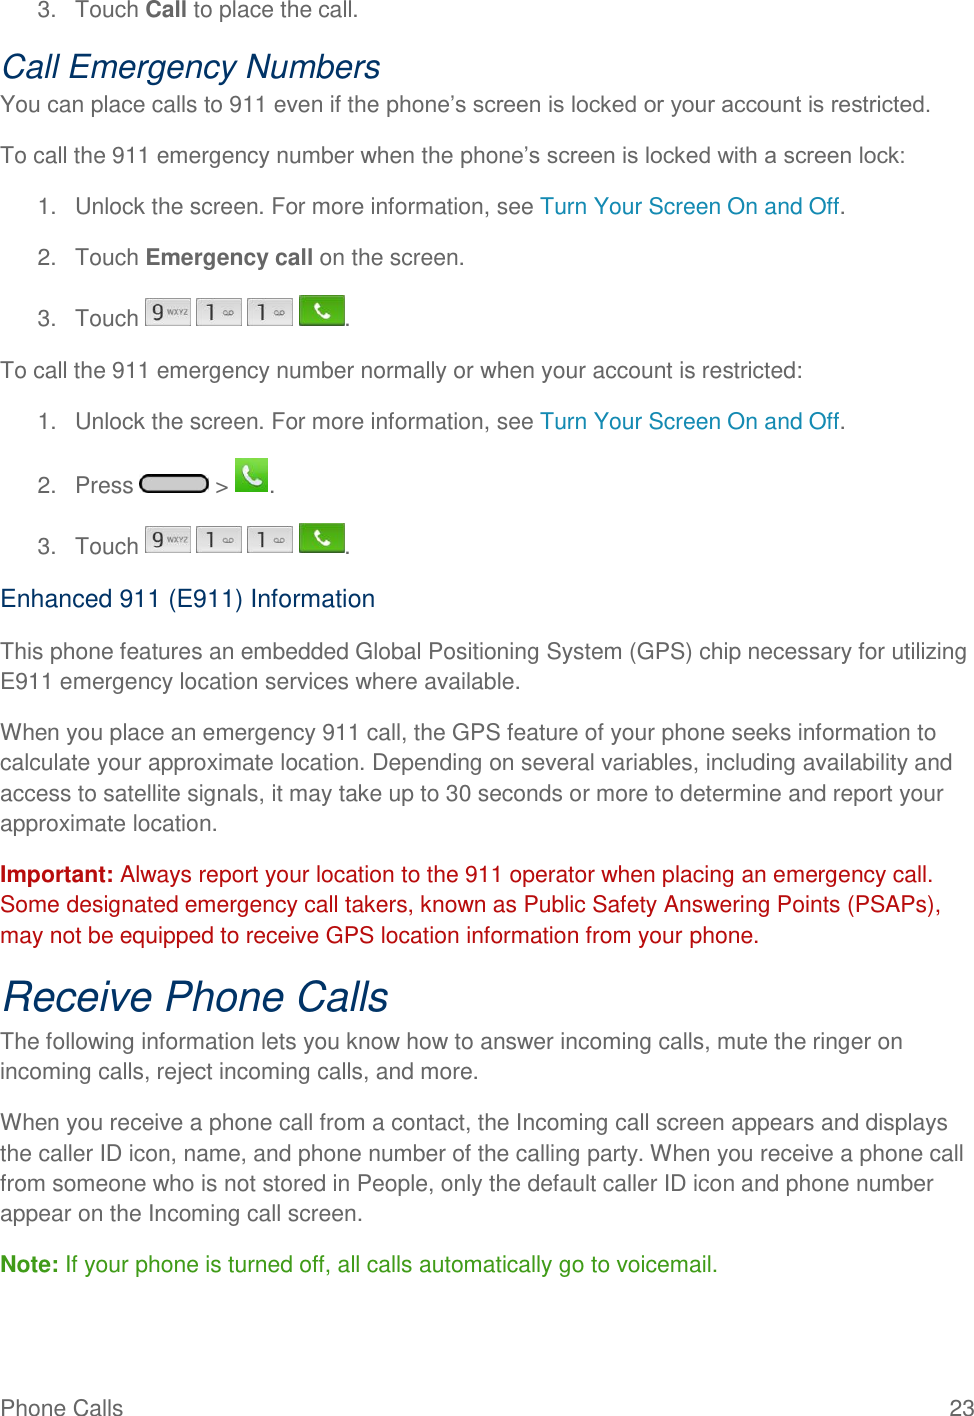 Phone Calls  23 3.  Touch Call to place the call. Call Emergency Numbers You can place calls to 911 even if the phone‘s screen is locked or your account is restricted. To call the 911 emergency number when the phone‘s screen is locked with a screen lock: 1.  Unlock the screen. For more information, see Turn Your Screen On and Off. 2.  Touch Emergency call on the screen. 3.  Touch        . To call the 911 emergency number normally or when your account is restricted: 1.  Unlock the screen. For more information, see Turn Your Screen On and Off. 2.  Press   &gt;  . 3.  Touch        . Enhanced 911 (E911) Information This phone features an embedded Global Positioning System (GPS) chip necessary for utilizing E911 emergency location services where available. When you place an emergency 911 call, the GPS feature of your phone seeks information to calculate your approximate location. Depending on several variables, including availability and access to satellite signals, it may take up to 30 seconds or more to determine and report your approximate location. Important: Always report your location to the 911 operator when placing an emergency call. Some designated emergency call takers, known as Public Safety Answering Points (PSAPs), may not be equipped to receive GPS location information from your phone. Receive Phone Calls The following information lets you know how to answer incoming calls, mute the ringer on incoming calls, reject incoming calls, and more. When you receive a phone call from a contact, the Incoming call screen appears and displays the caller ID icon, name, and phone number of the calling party. When you receive a phone call from someone who is not stored in People, only the default caller ID icon and phone number appear on the Incoming call screen. Note: If your phone is turned off, all calls automatically go to voicemail. 